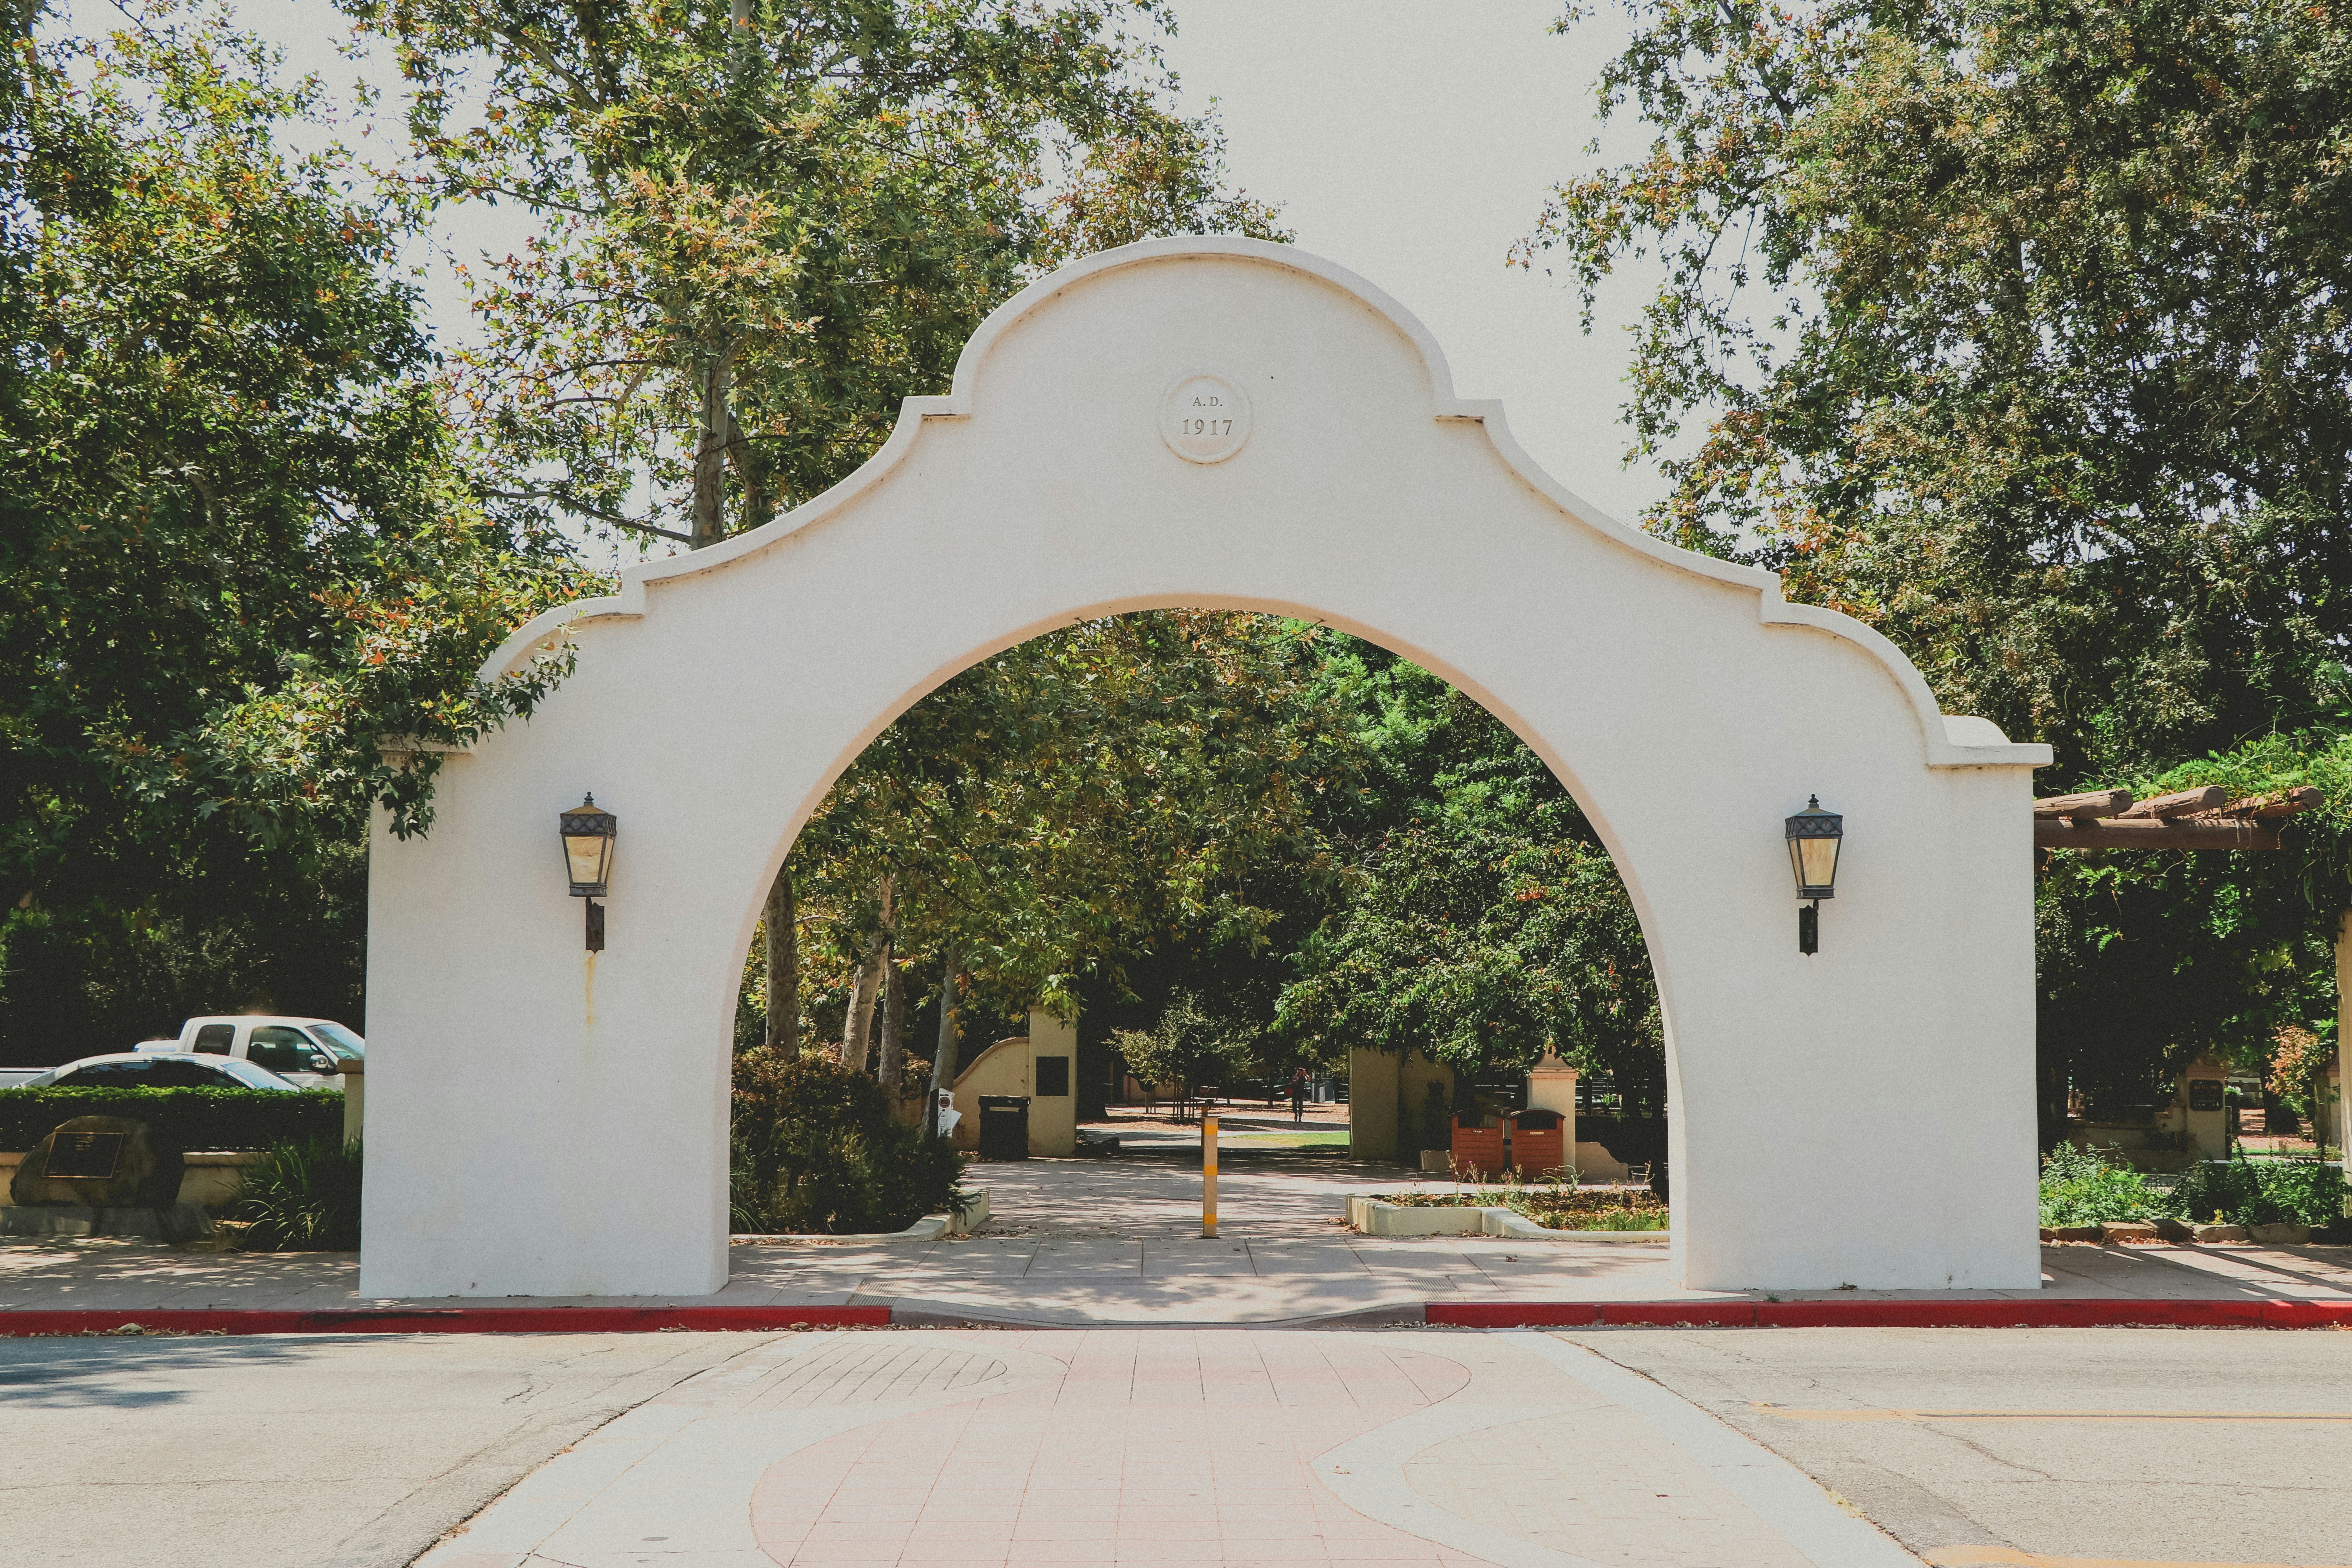 A white mission-style adobe arch with a scalloped top and two black iron lantern sconces marks the entrance to Libbey Park in Ojai, California, full of large green trees and a paved walkway from the viewer straight back in the frame.